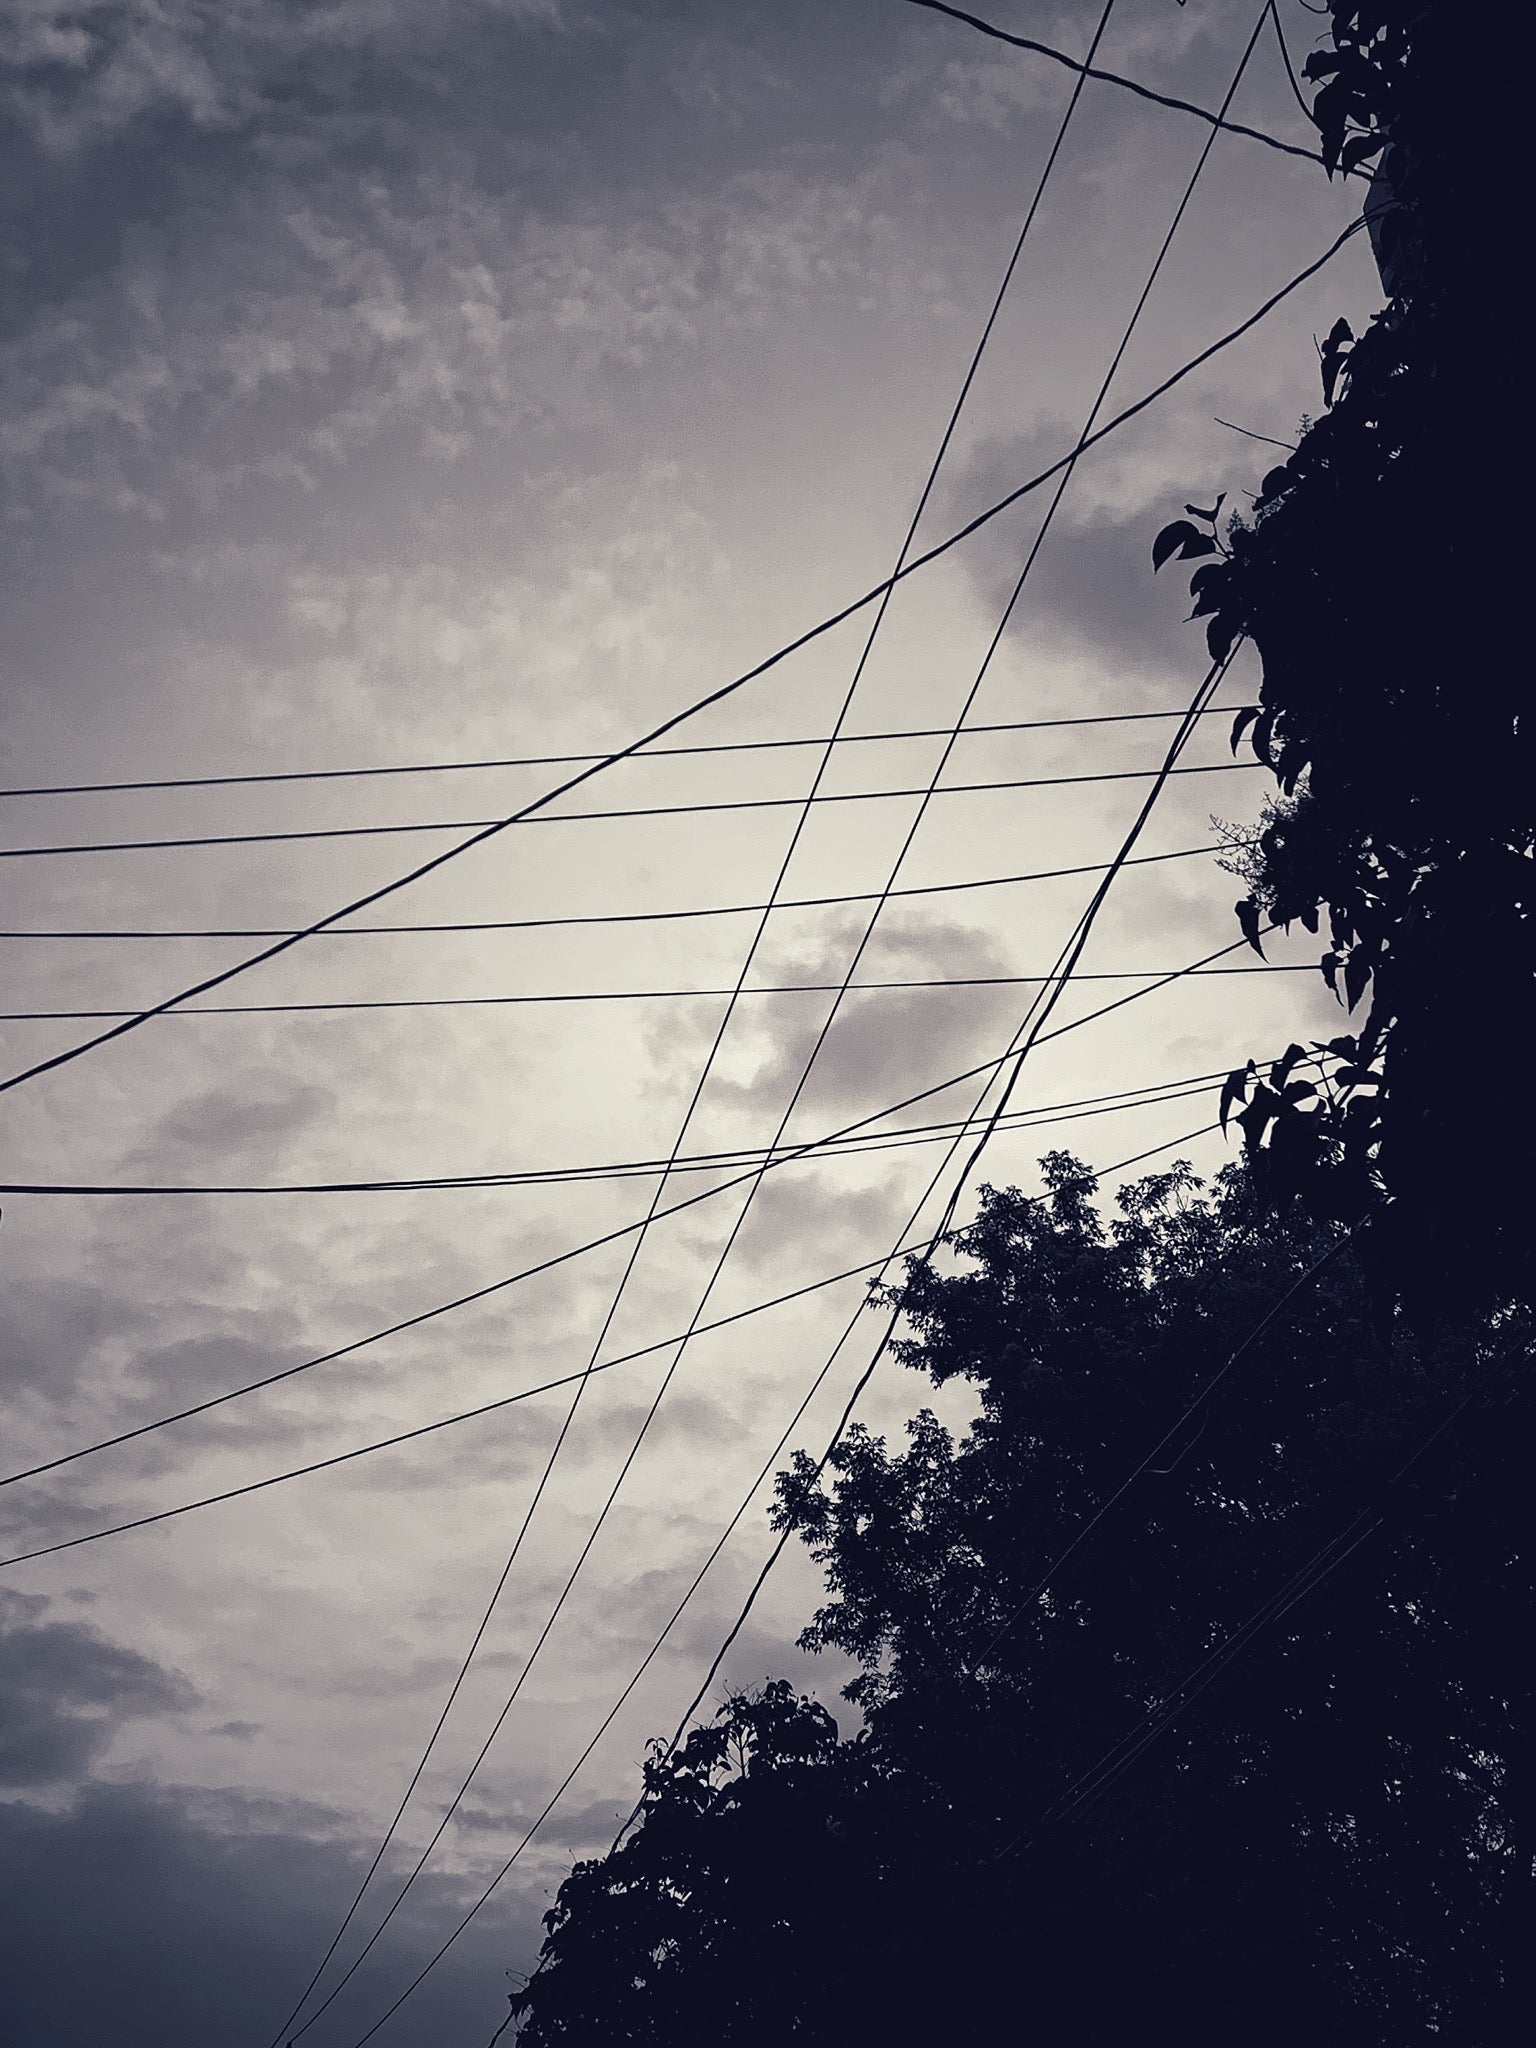 A multitude of electric lines and cables crossing in every direction